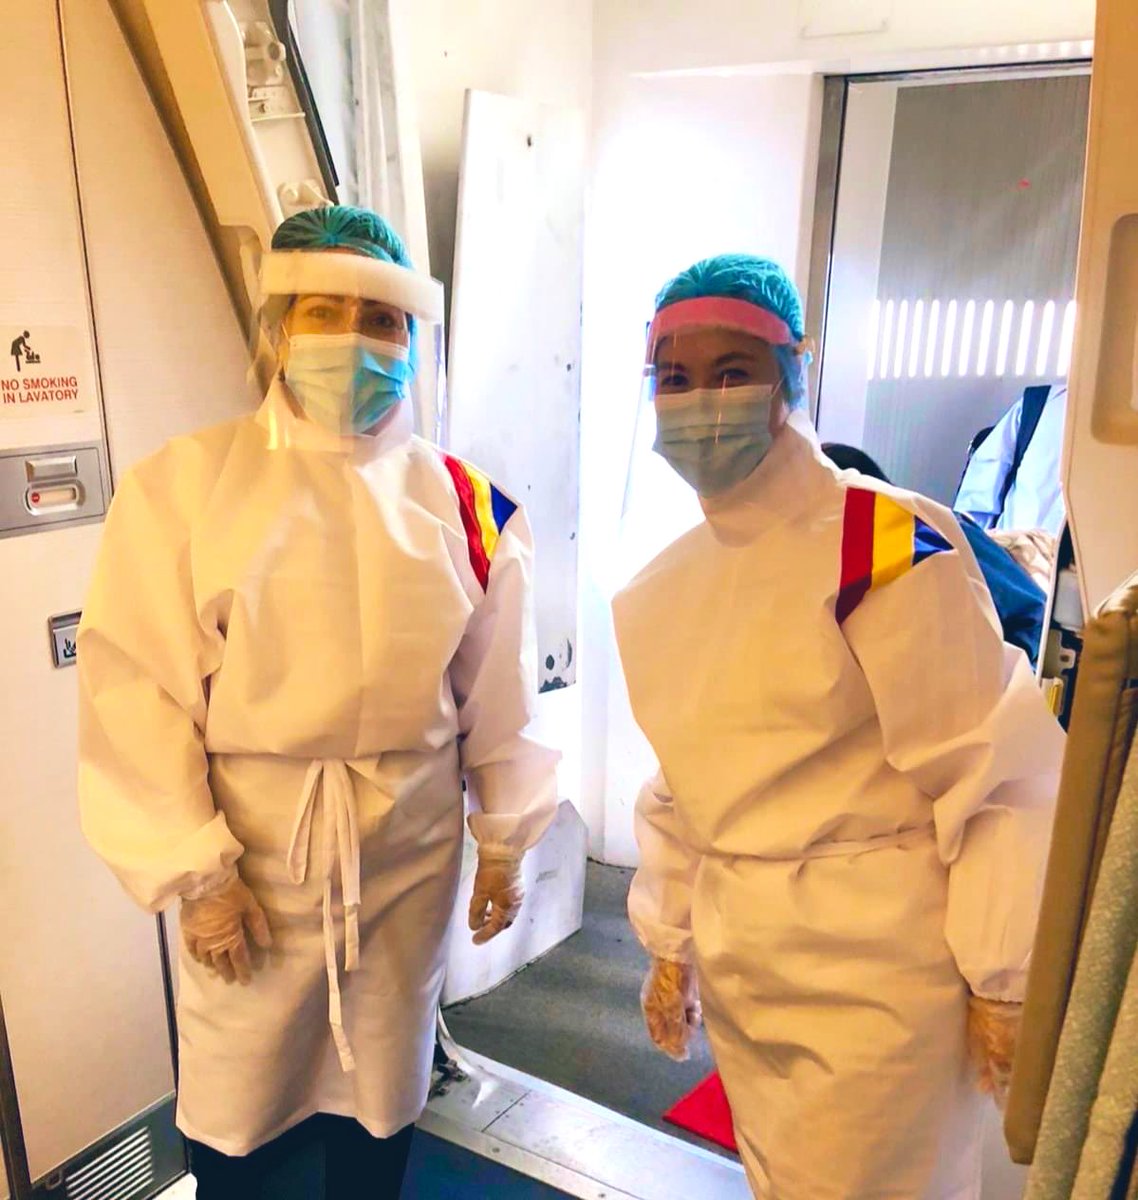 Most airport staff, including immigration, are still not wearing masks or gloves (despite close proximity handling of passports) Now, many countries are concerned with new clusters of  #COVID19 cases FROM Britain, some airlines have cabin crew in full PPE for London flights 